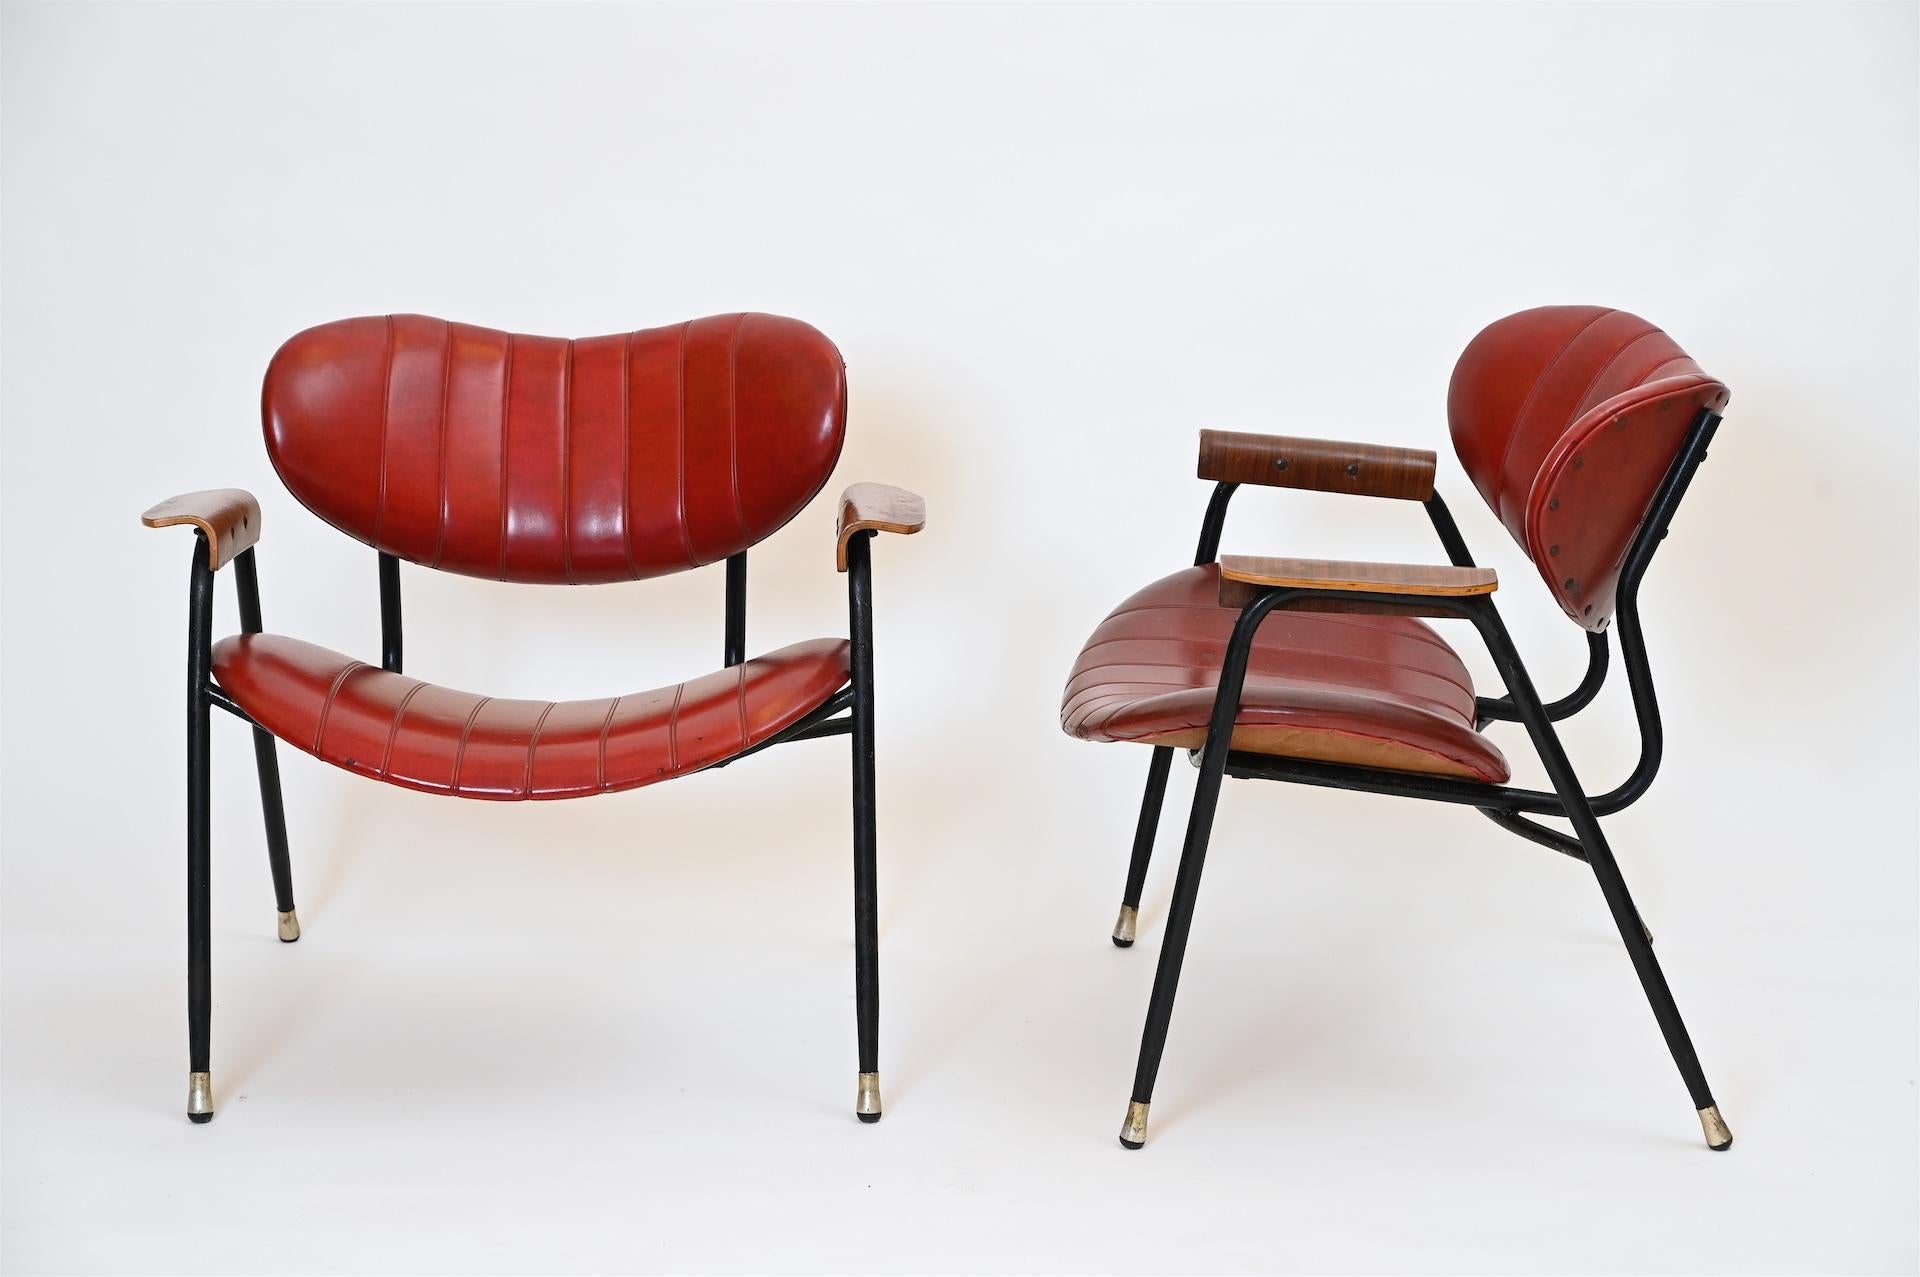 Unrestored midcentury Italian armchairs with original red upholstery.

Actually very comfortable chairs!